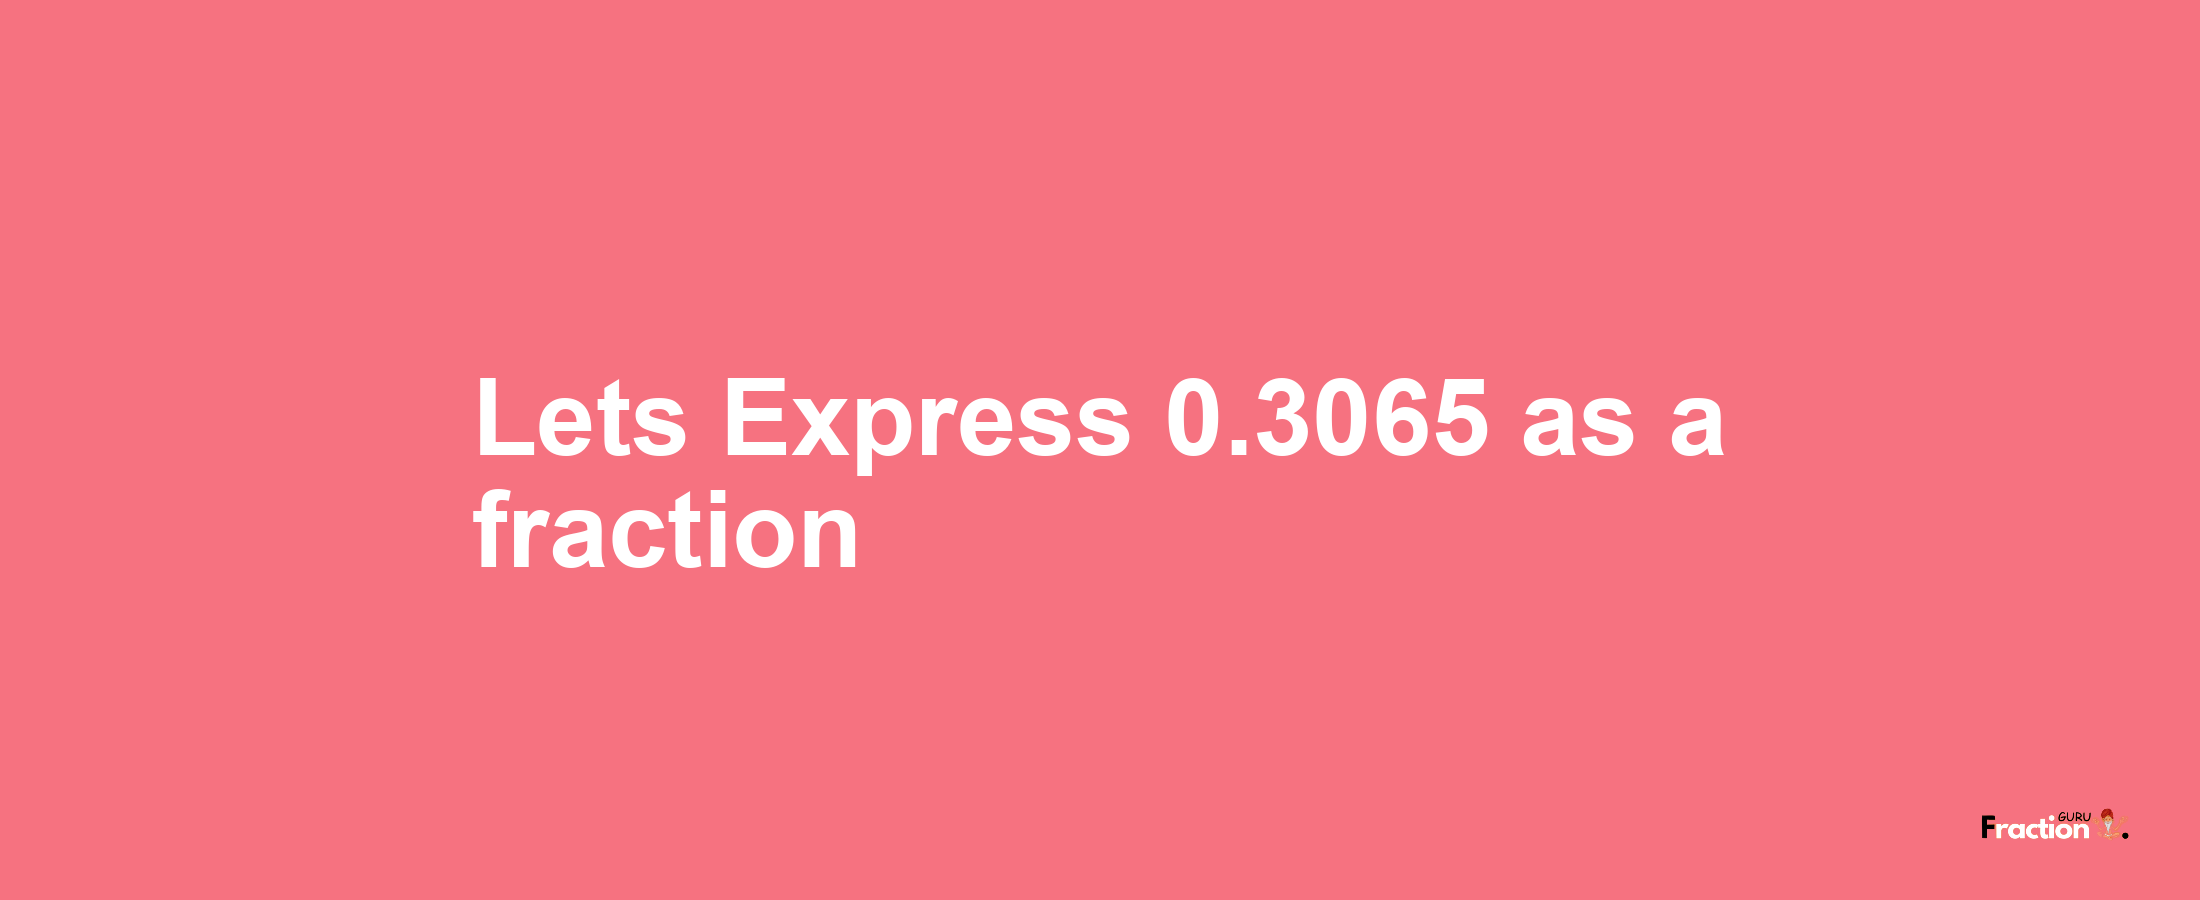 Lets Express 0.3065 as afraction